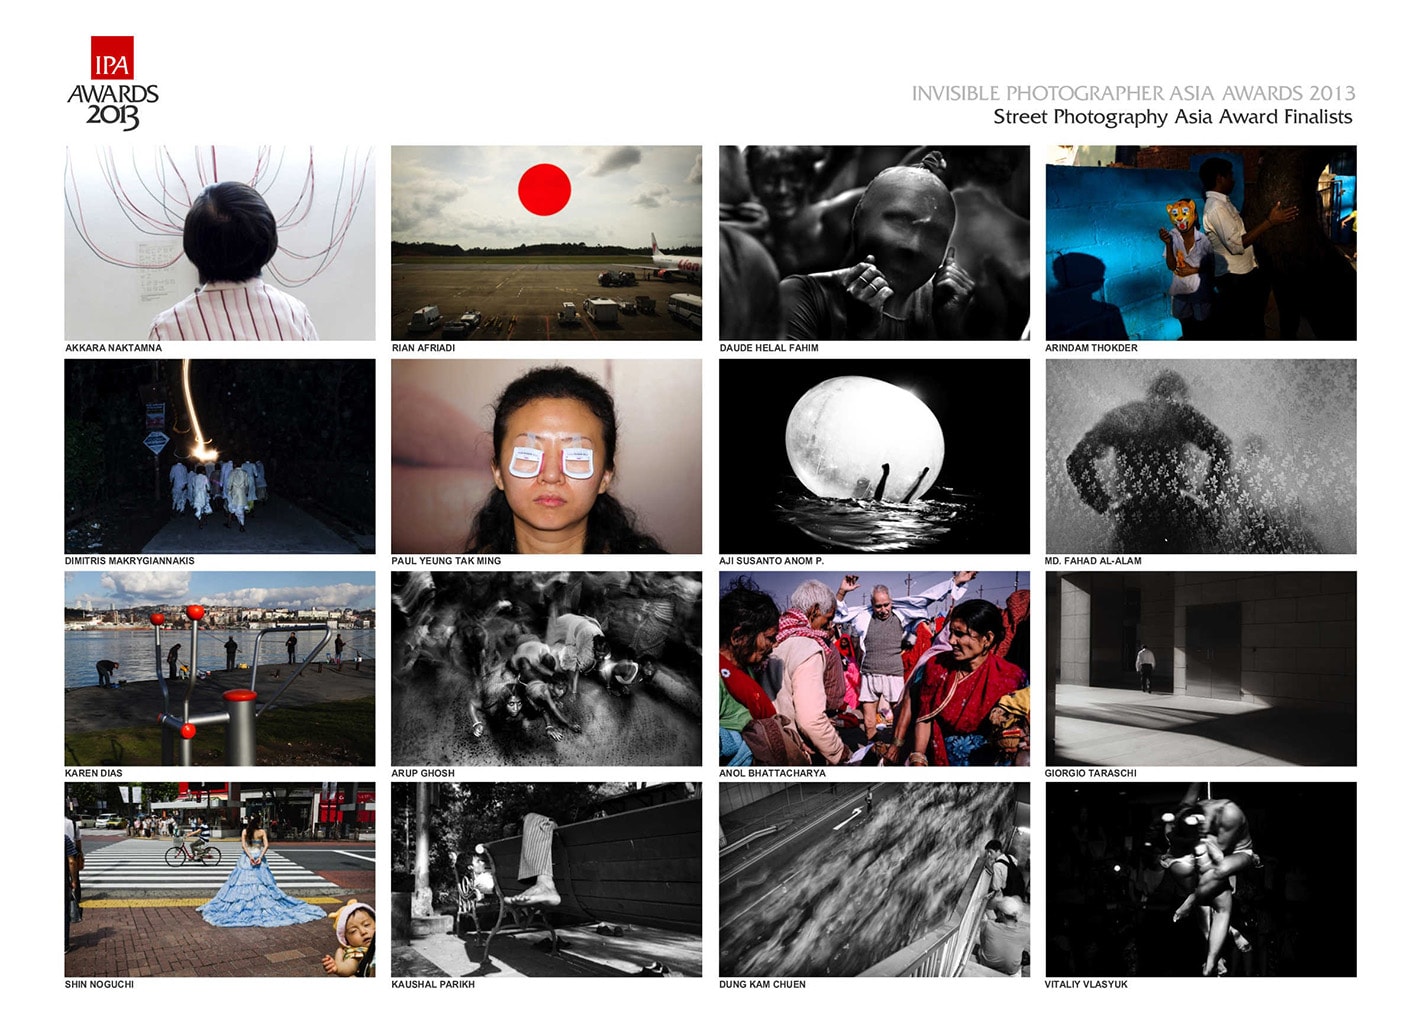 Paul Yeung awarded 2nd Prize Winner of the Invisible Photographer Street Photography Asia Awards 2013